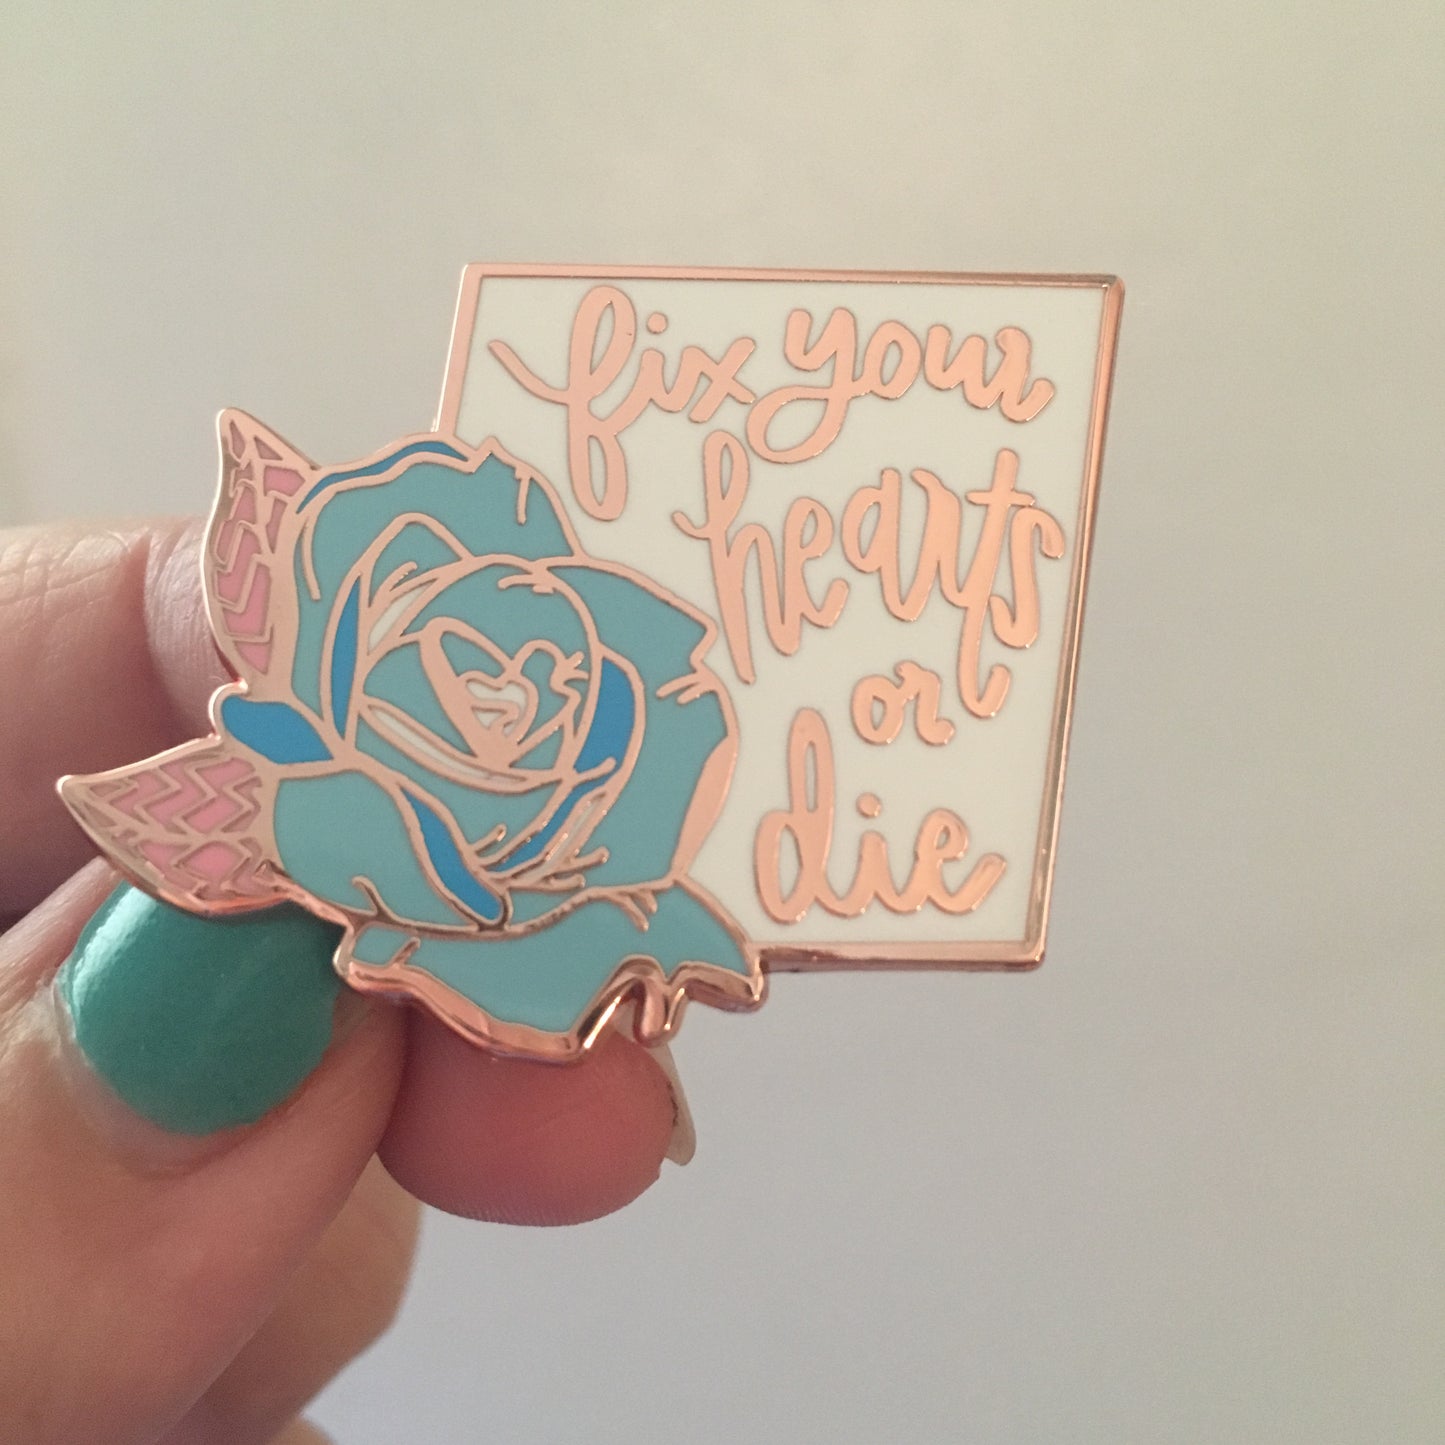 Fix Your Hearts Or Die - Blue Rose Enamel Pin - Charity Pin